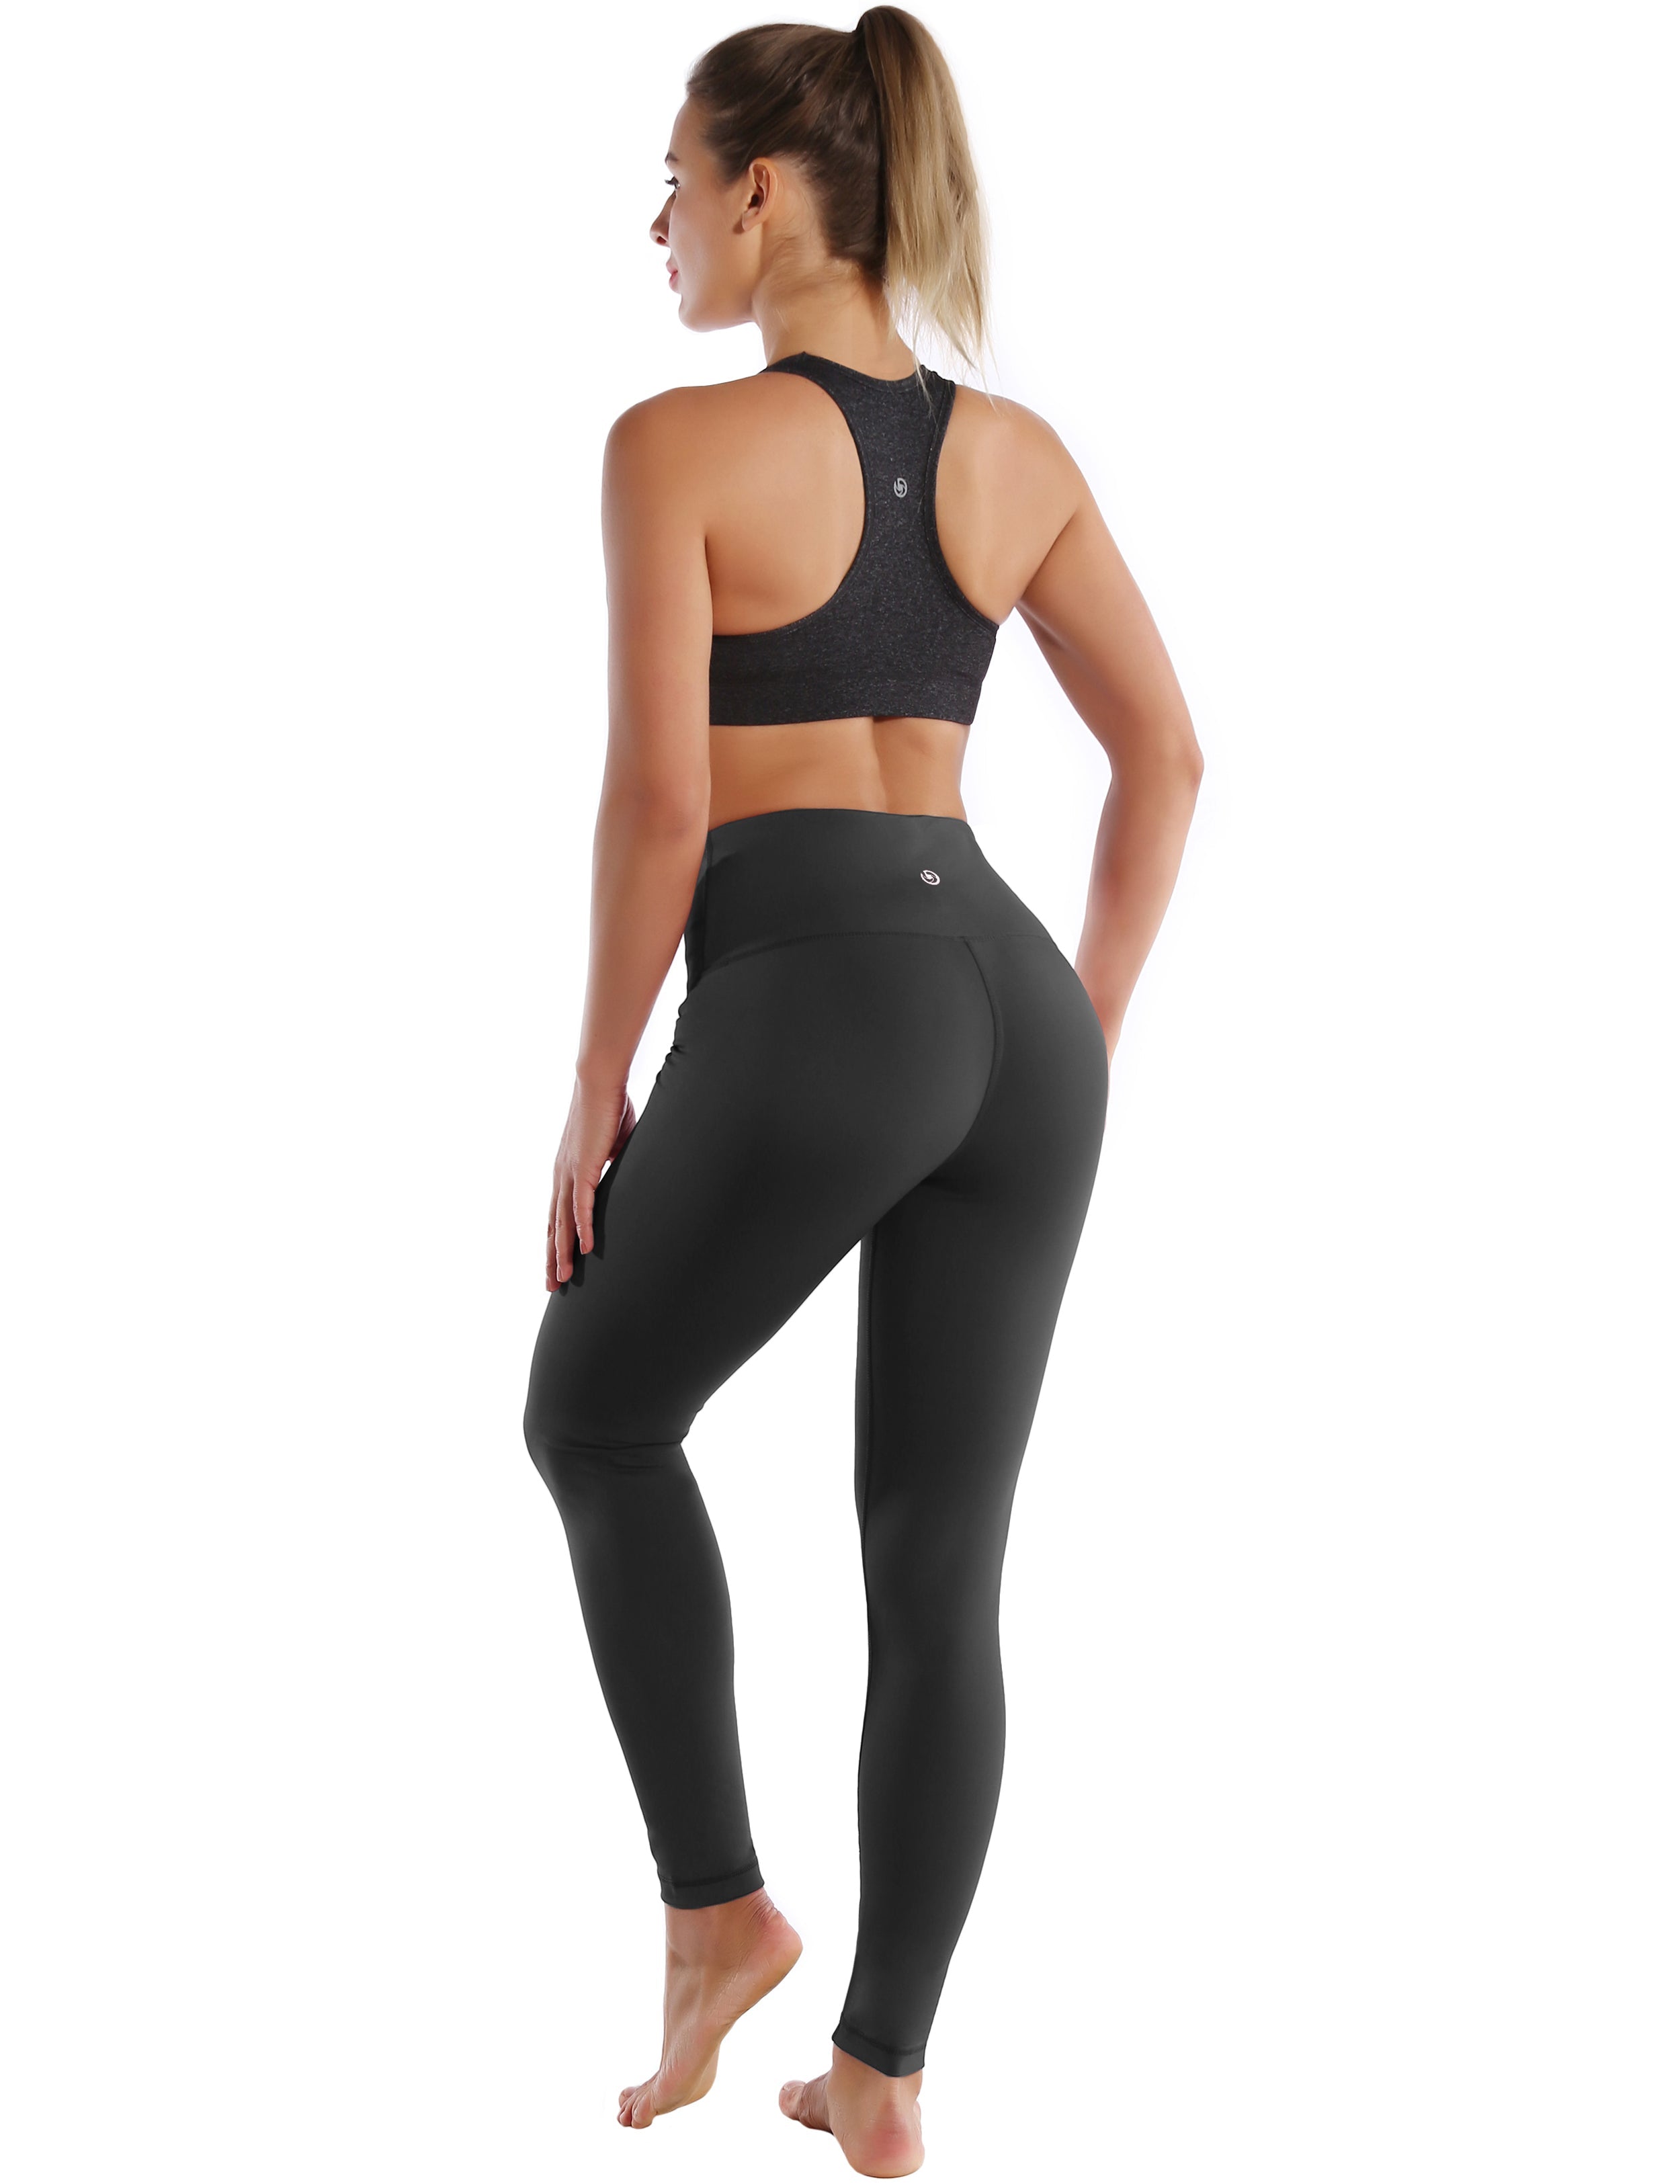 High Waist Pilates Pants shadowcharcoal 75%Nylon/25%Spandex Fabric doesn't attract lint easily 4-way stretch No see-through Moisture-wicking Tummy control Inner pocket Four lengths